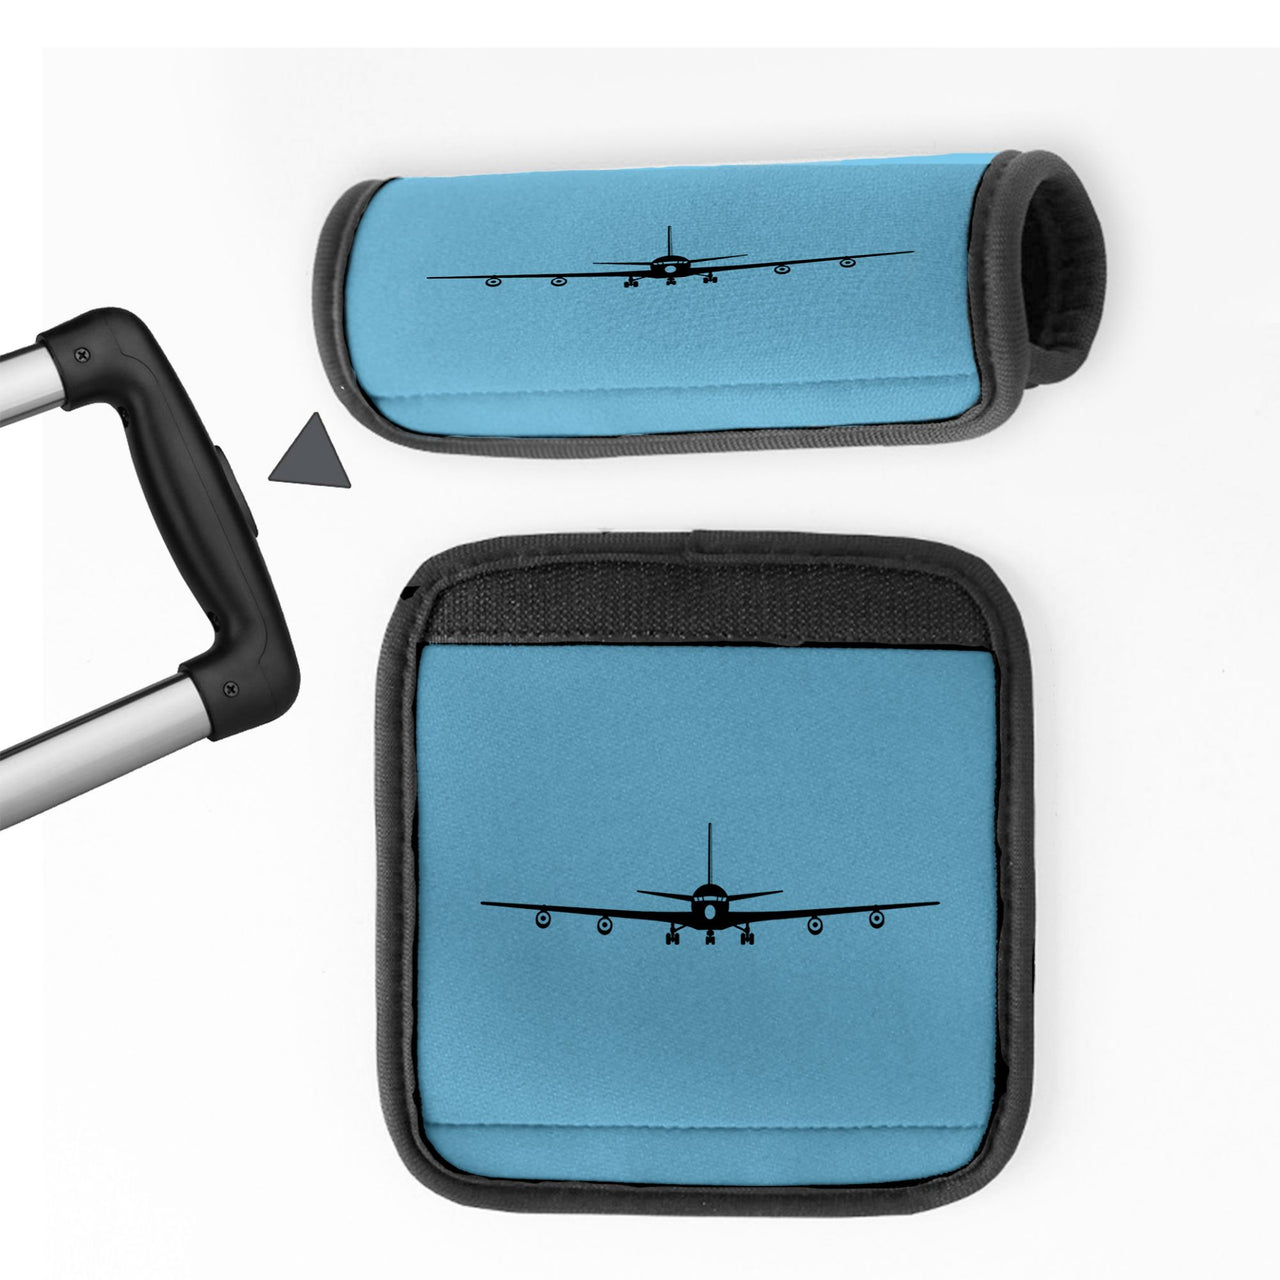 Boeing 707 Silhouette Designed Neoprene Luggage Handle Covers